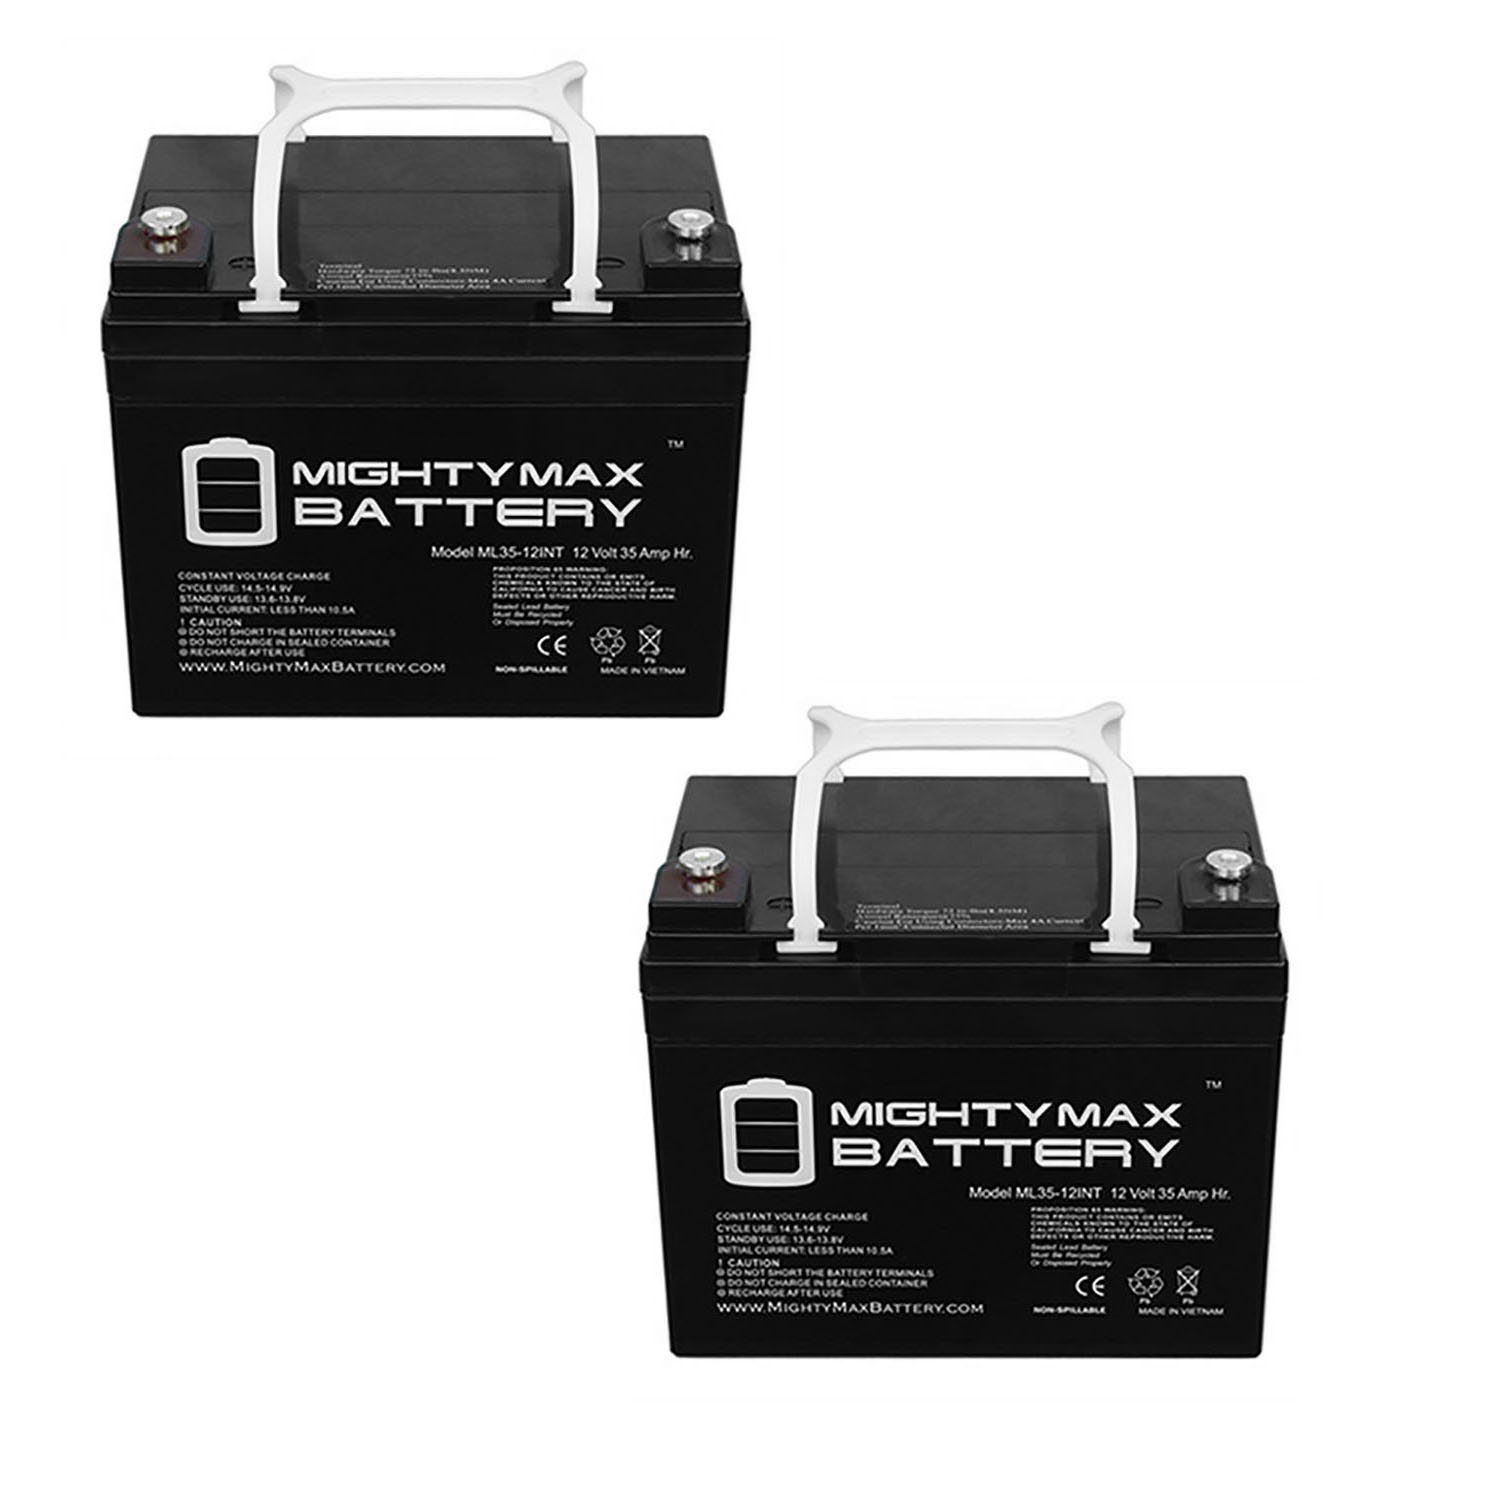 12V 35AH INT Replacement Battery for Zeus Battery PC33-12M - 2 Pack